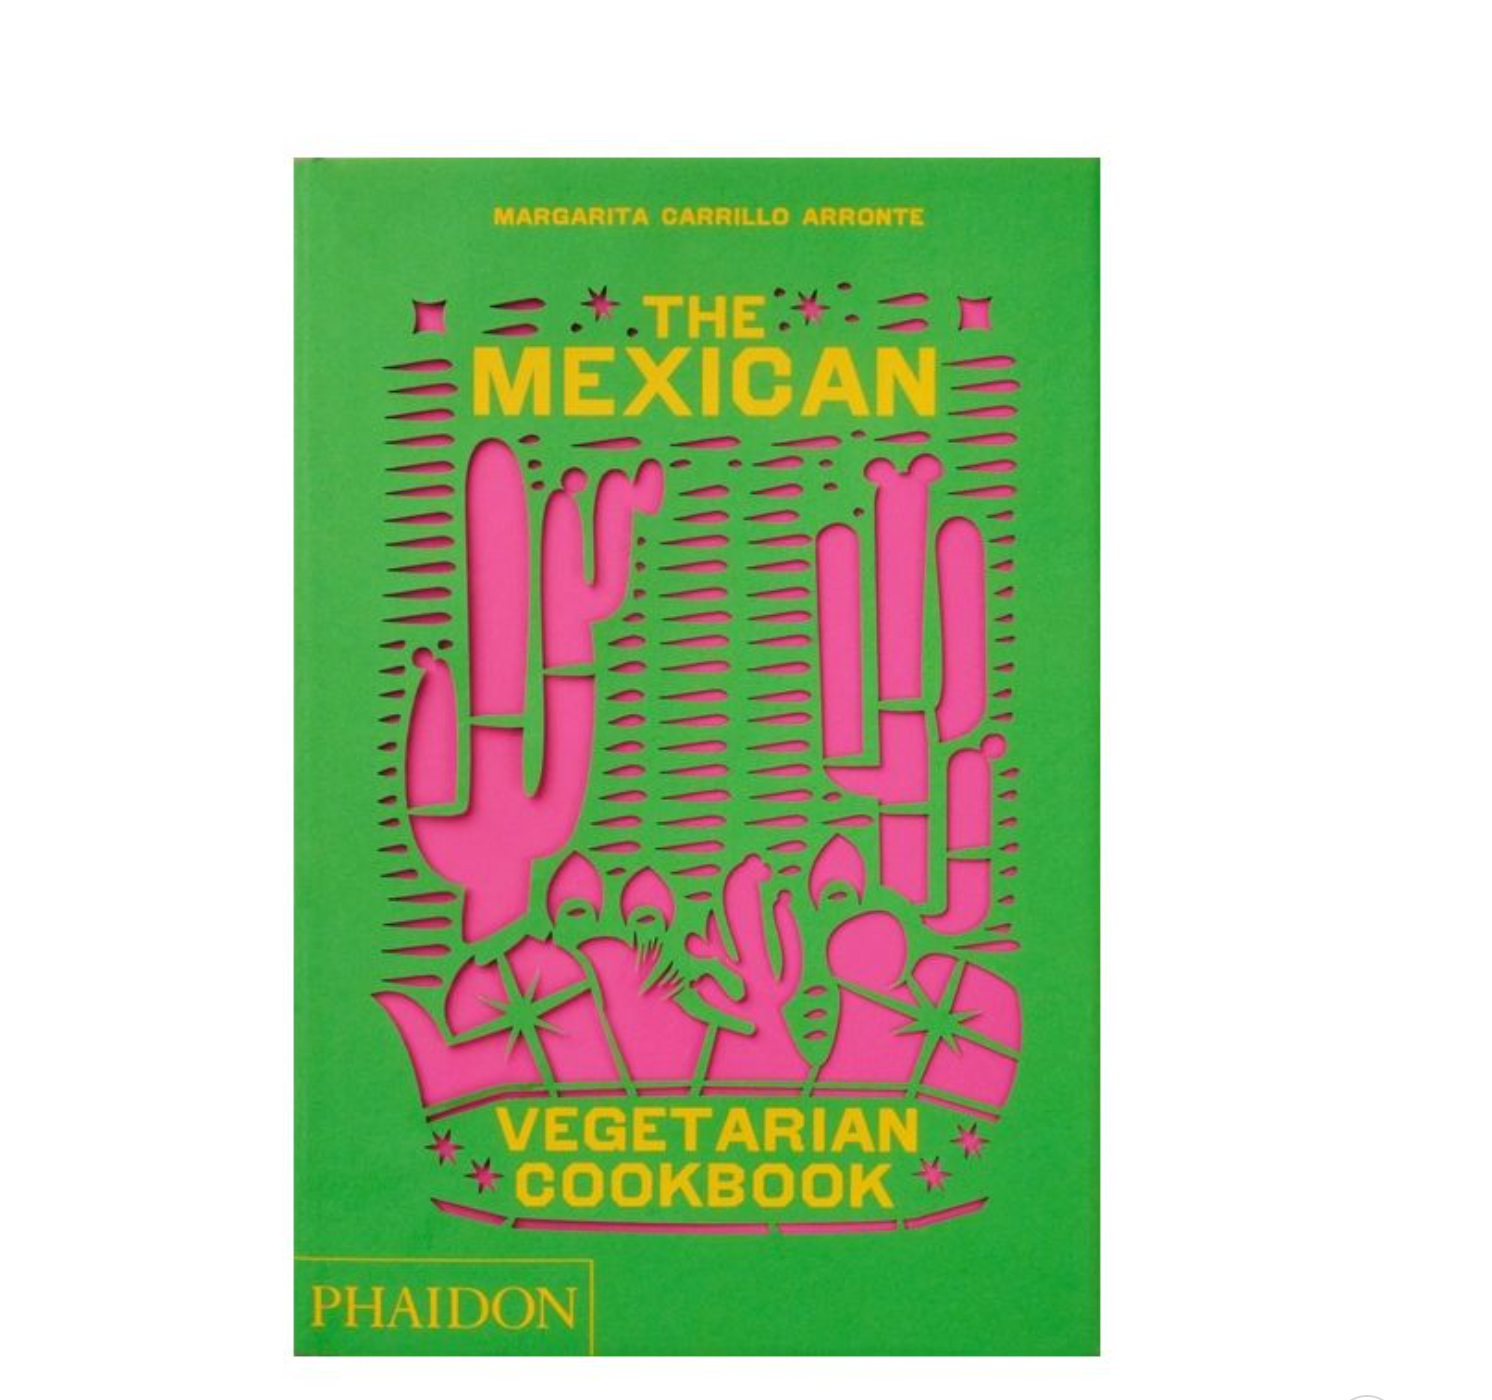 The Mexican Vegetarian